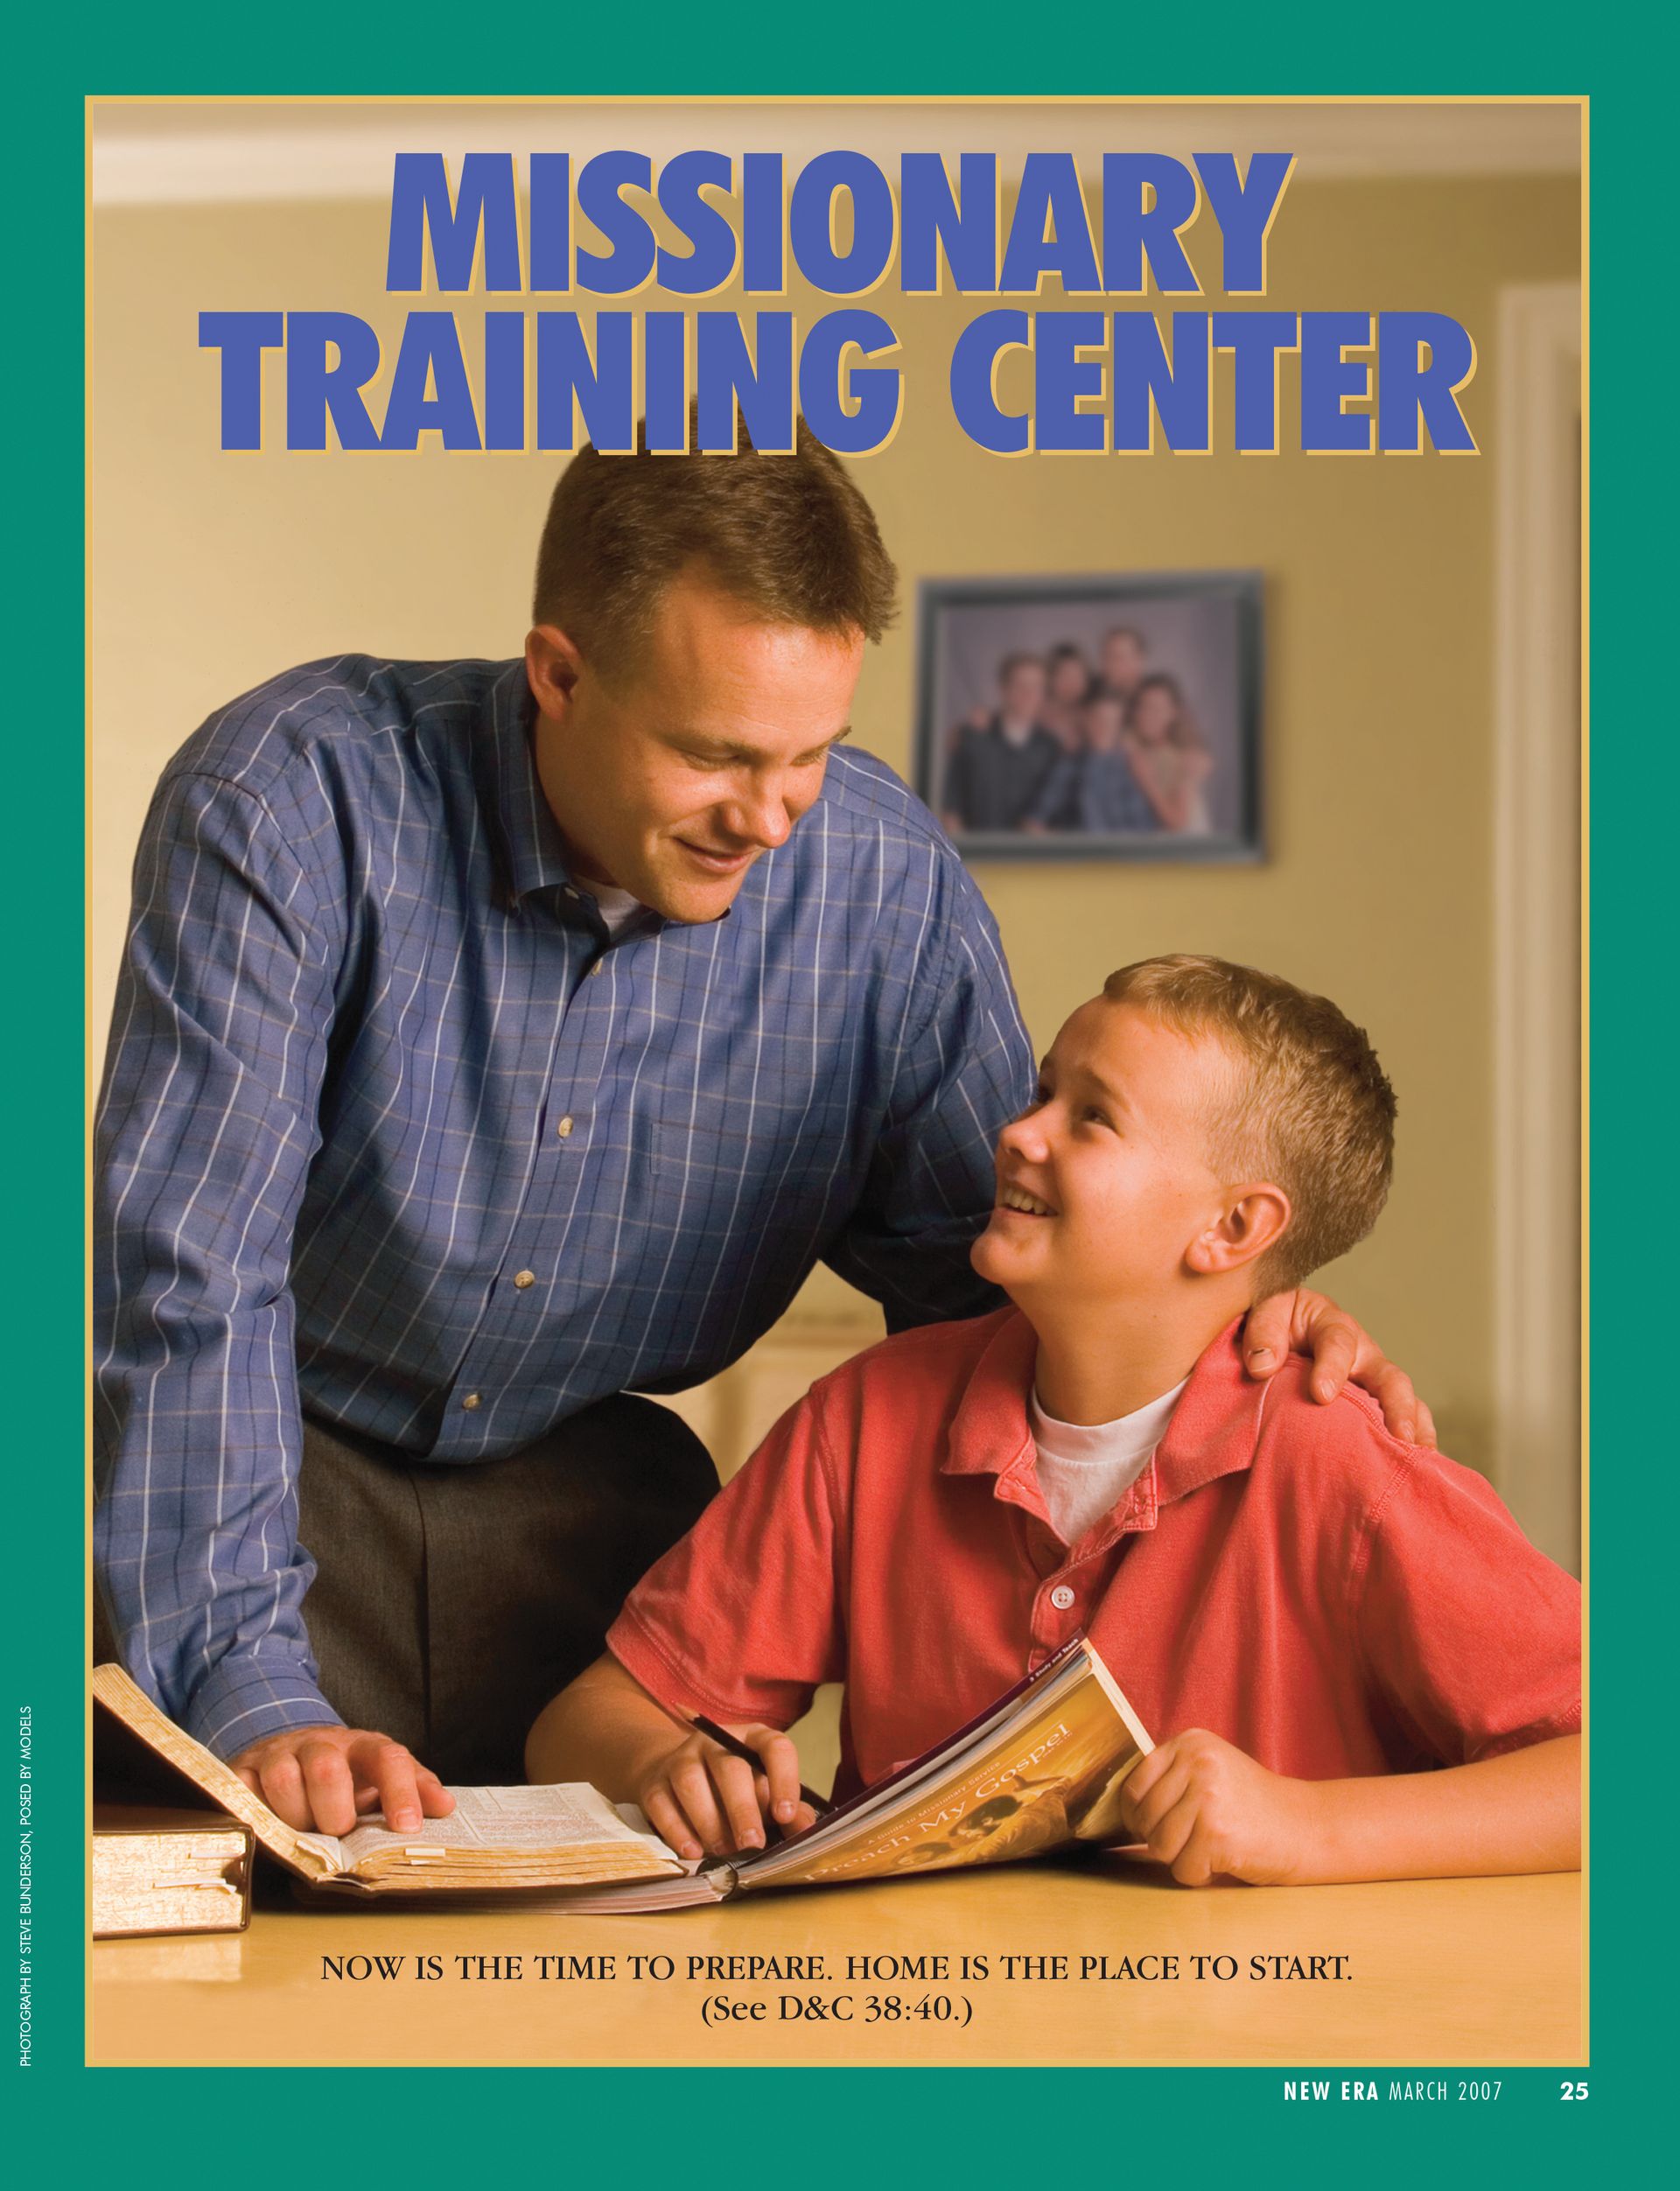 Missionary Training Center. Now is the time to prepare. Home is the place to start. (See D&C 38:40.) Mar. 2007 © undefined ipCode 1.